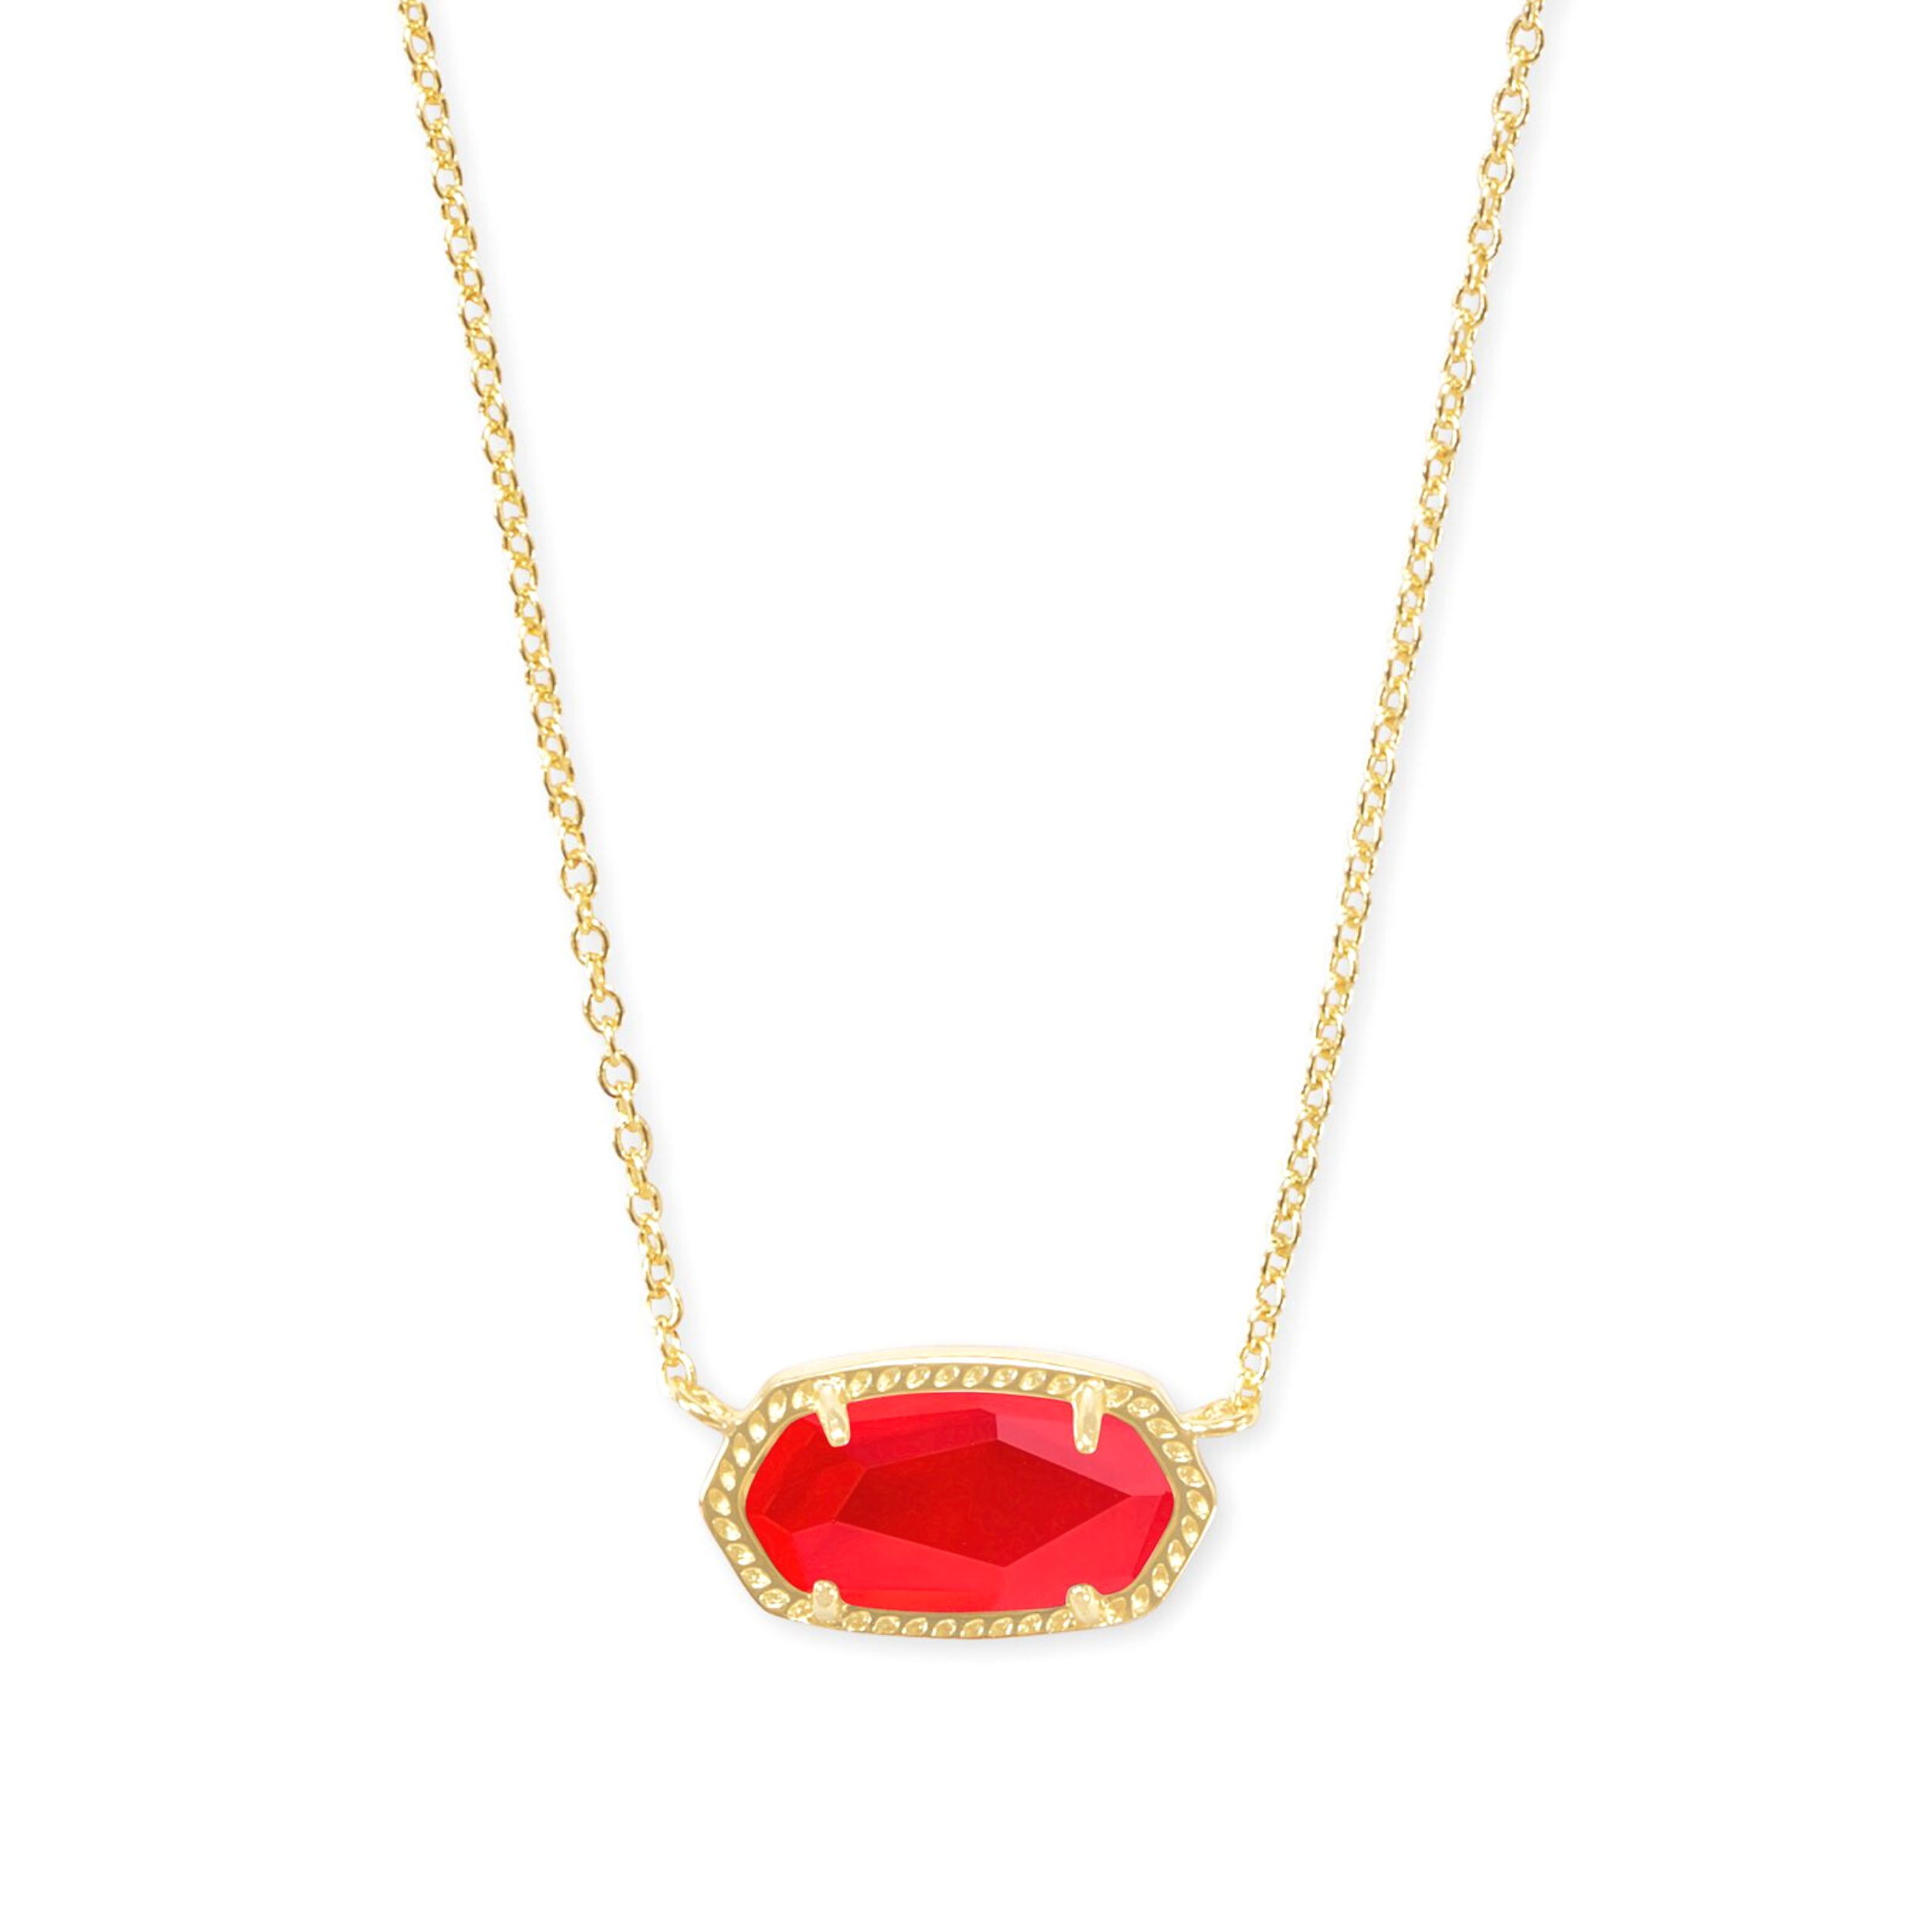 Kendra Scott | Elisa Gold Pendant Necklace in Red Illusion